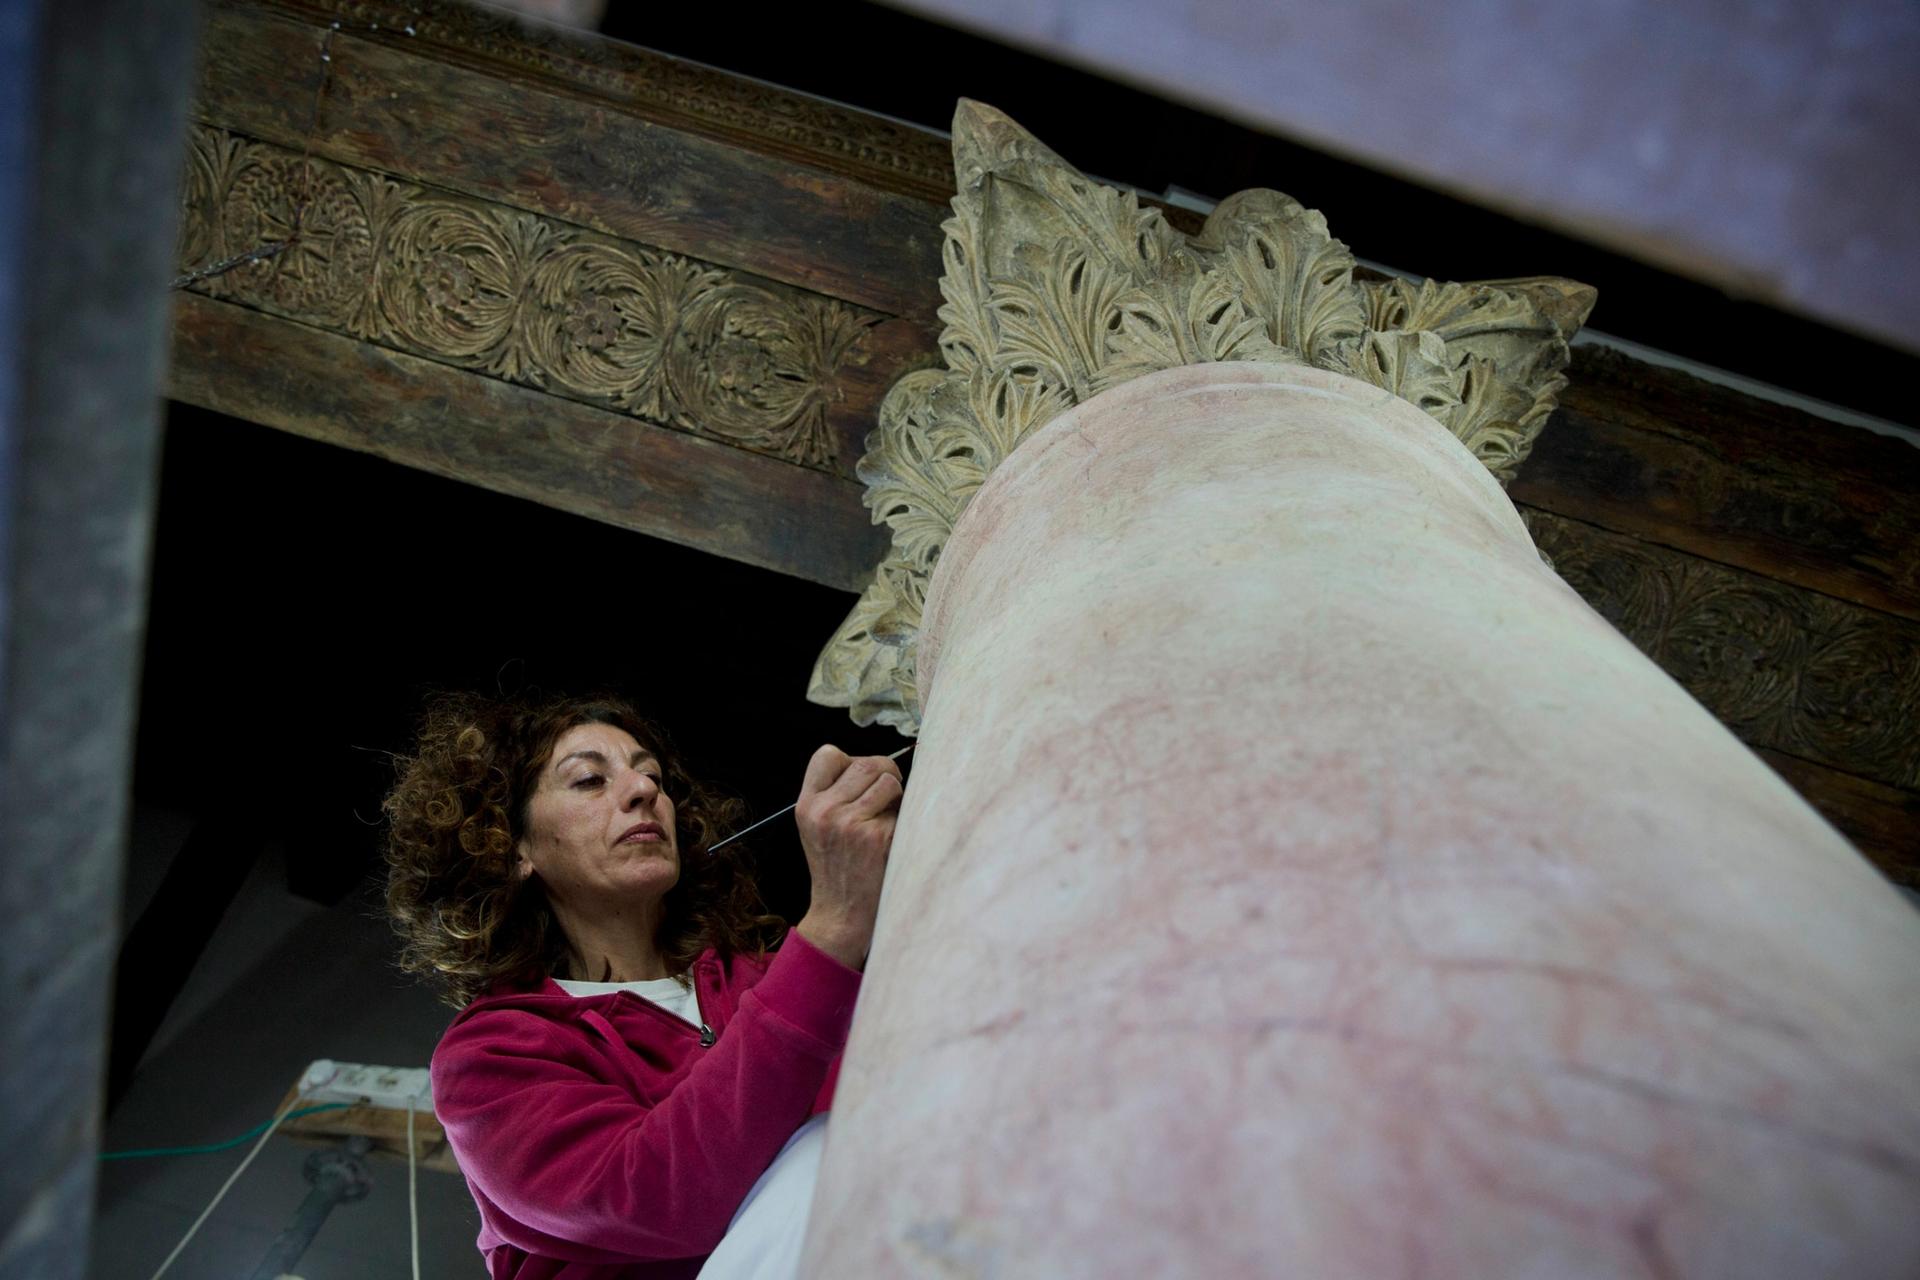 A woman is shown wearing a purple sweater and holding a small brush performing restoration on a granite column.